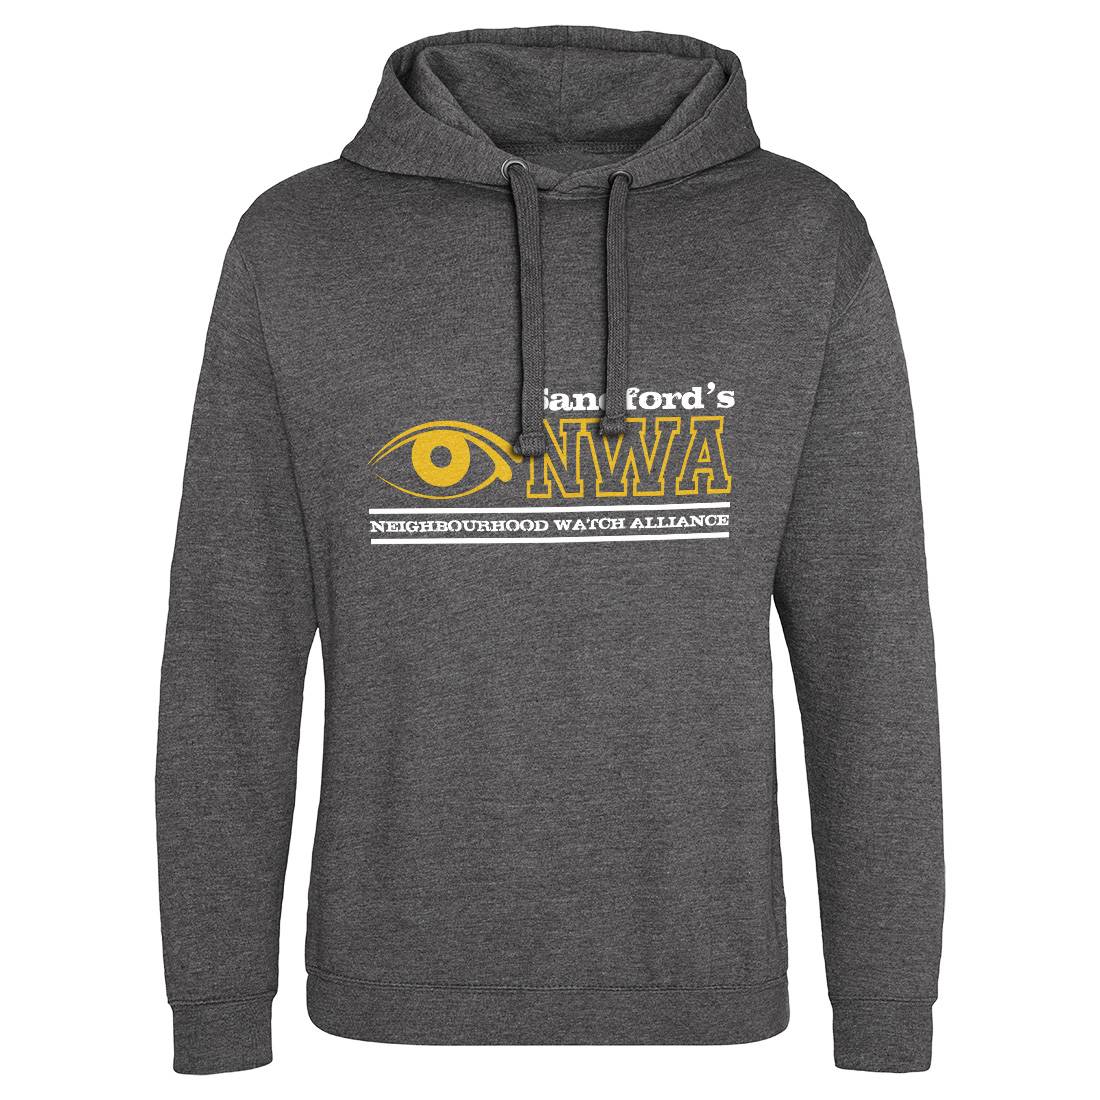 Nwa Mens Hoodie Without Pocket Retro D426